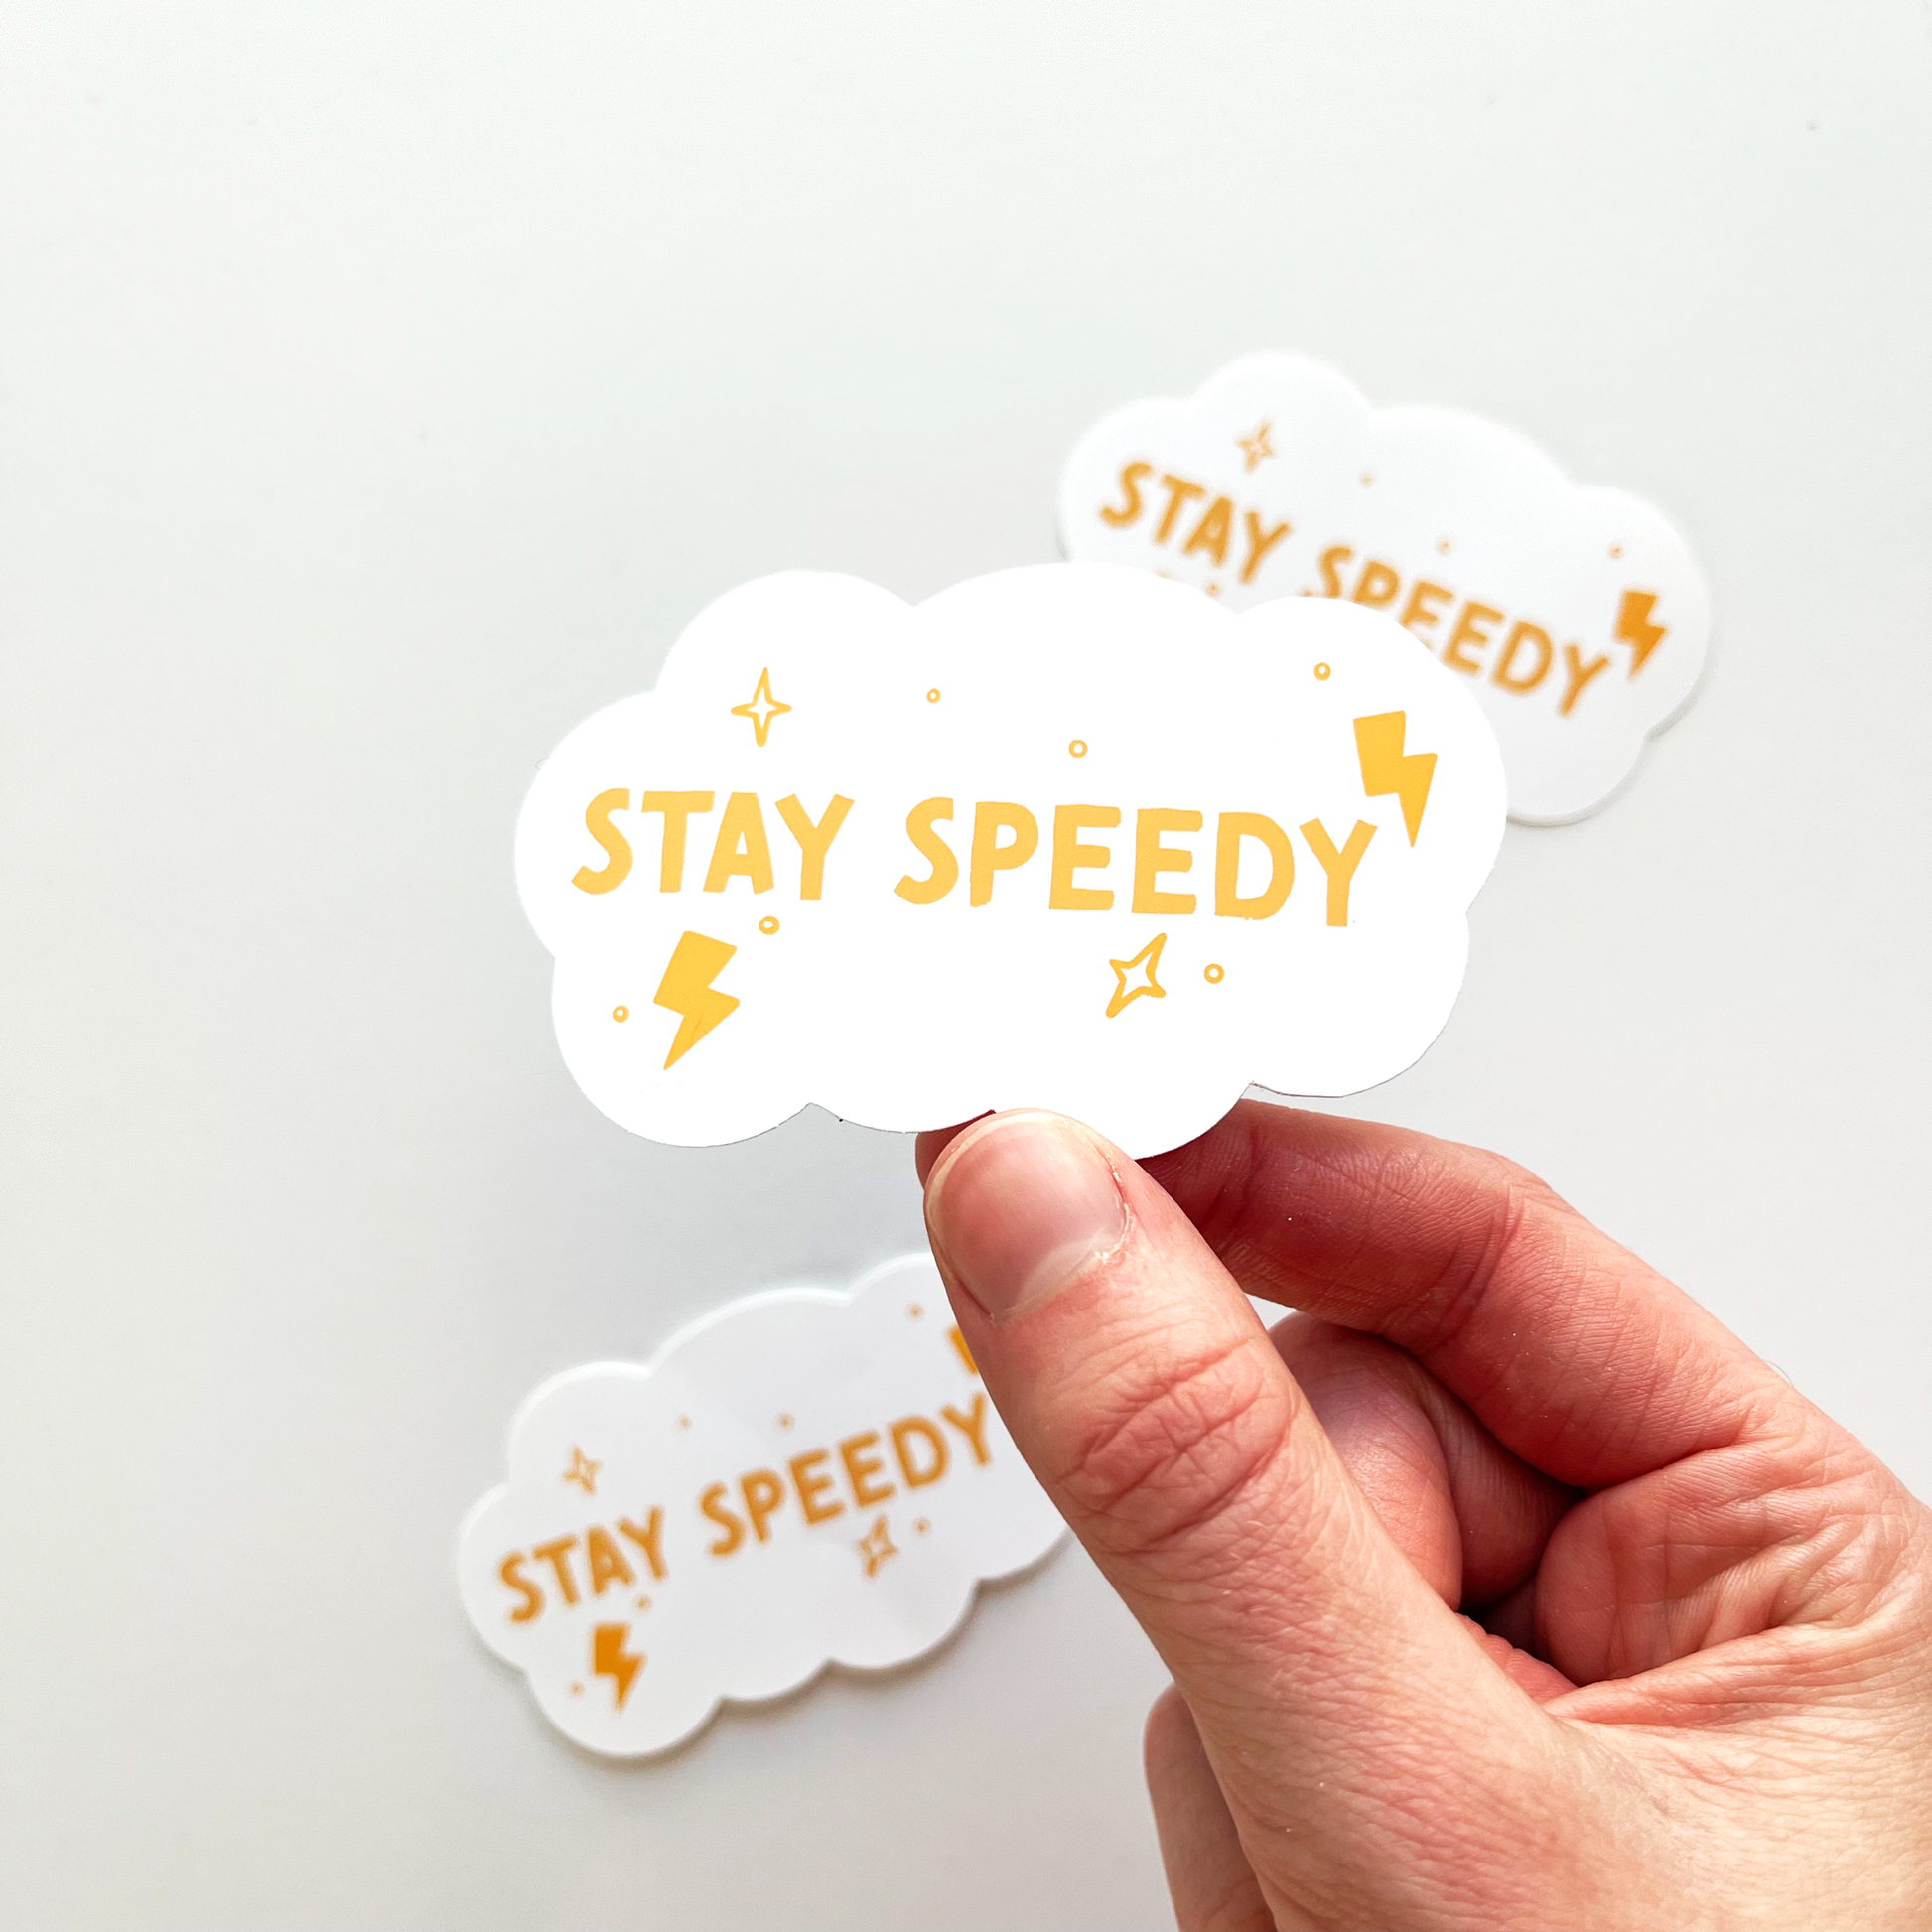 Stay speedy sticker shaped as a white cloud with yellow text and accents of tiny lightning bolts and stars